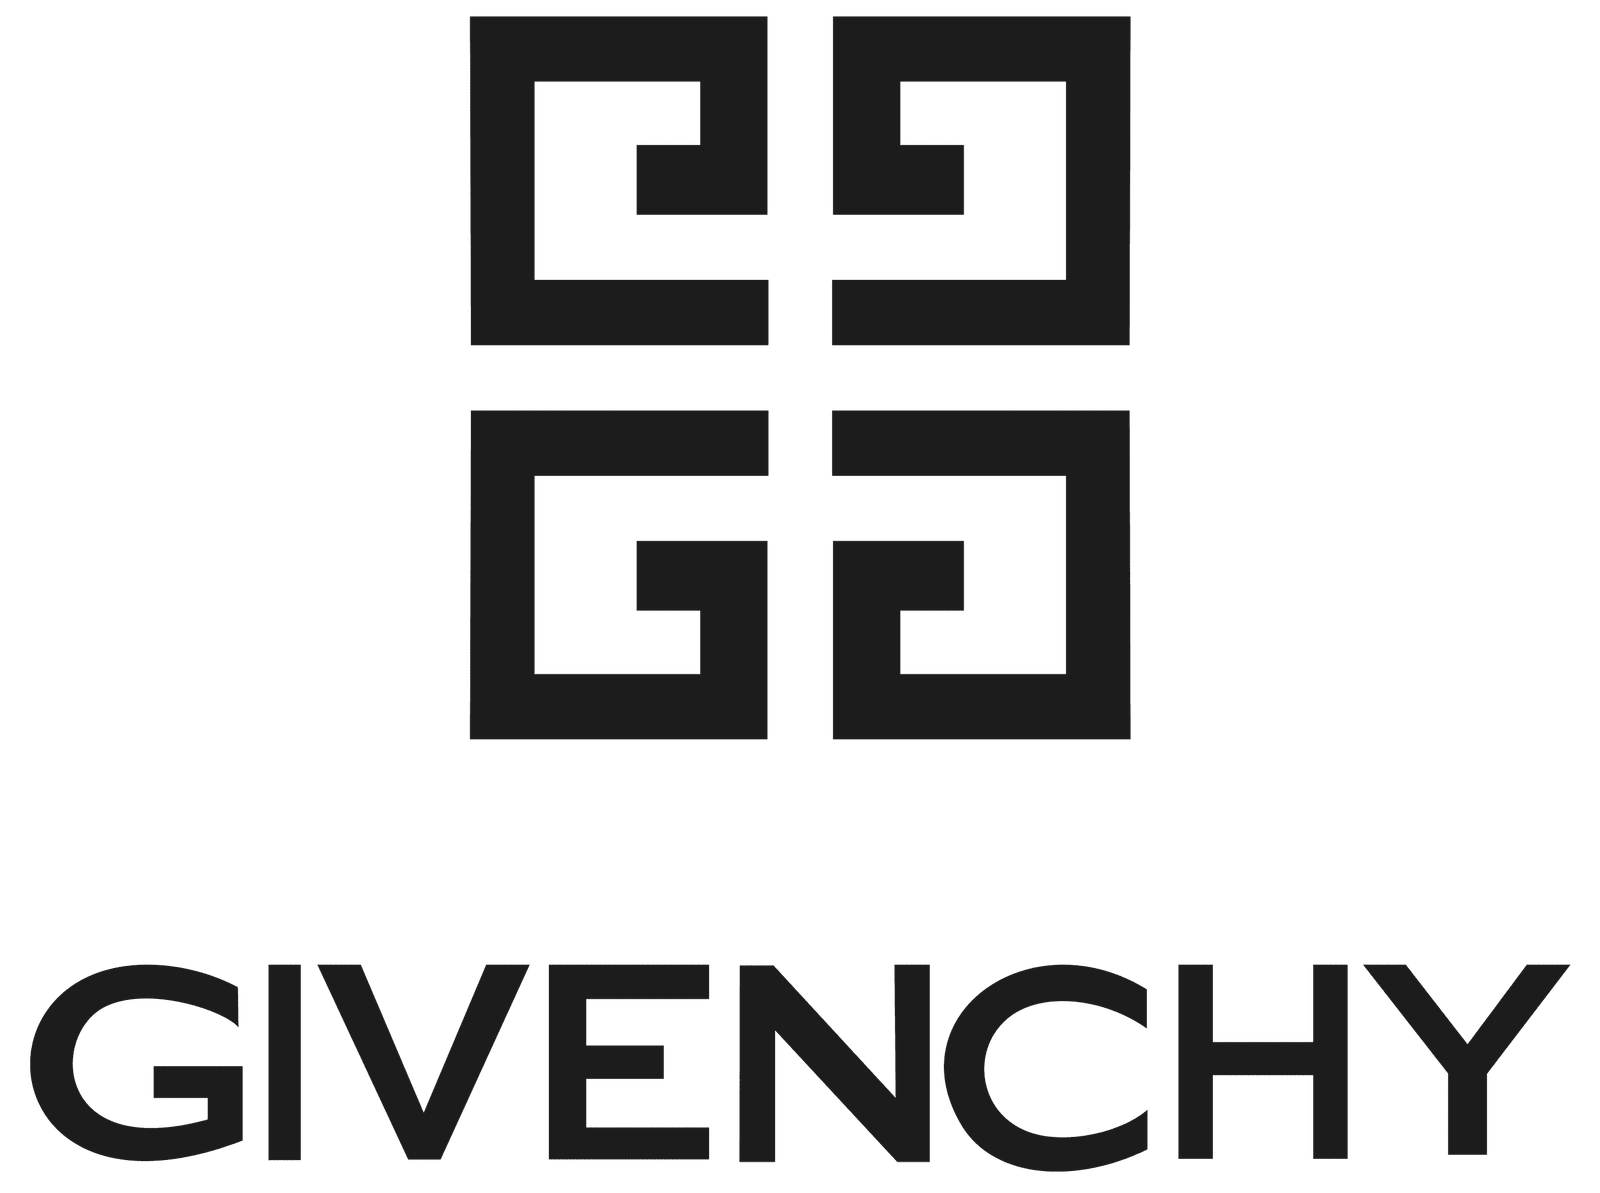 Givenchy logo and some history behind the brand